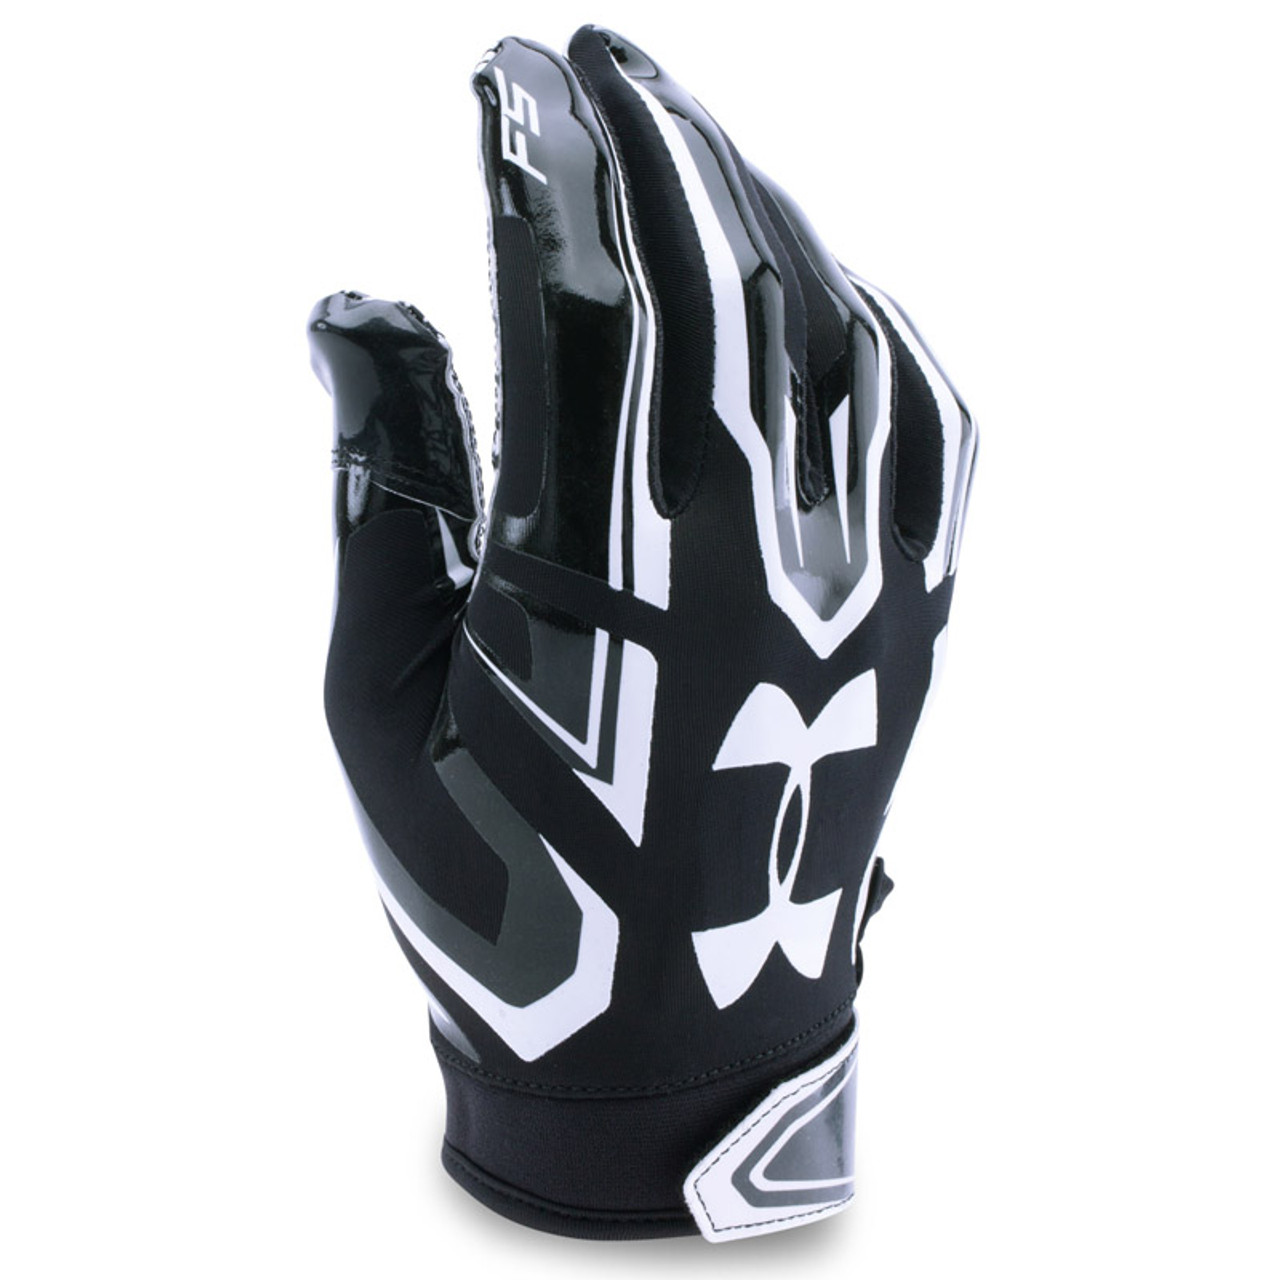 Under Armour Youth Football Gloves Size Chart